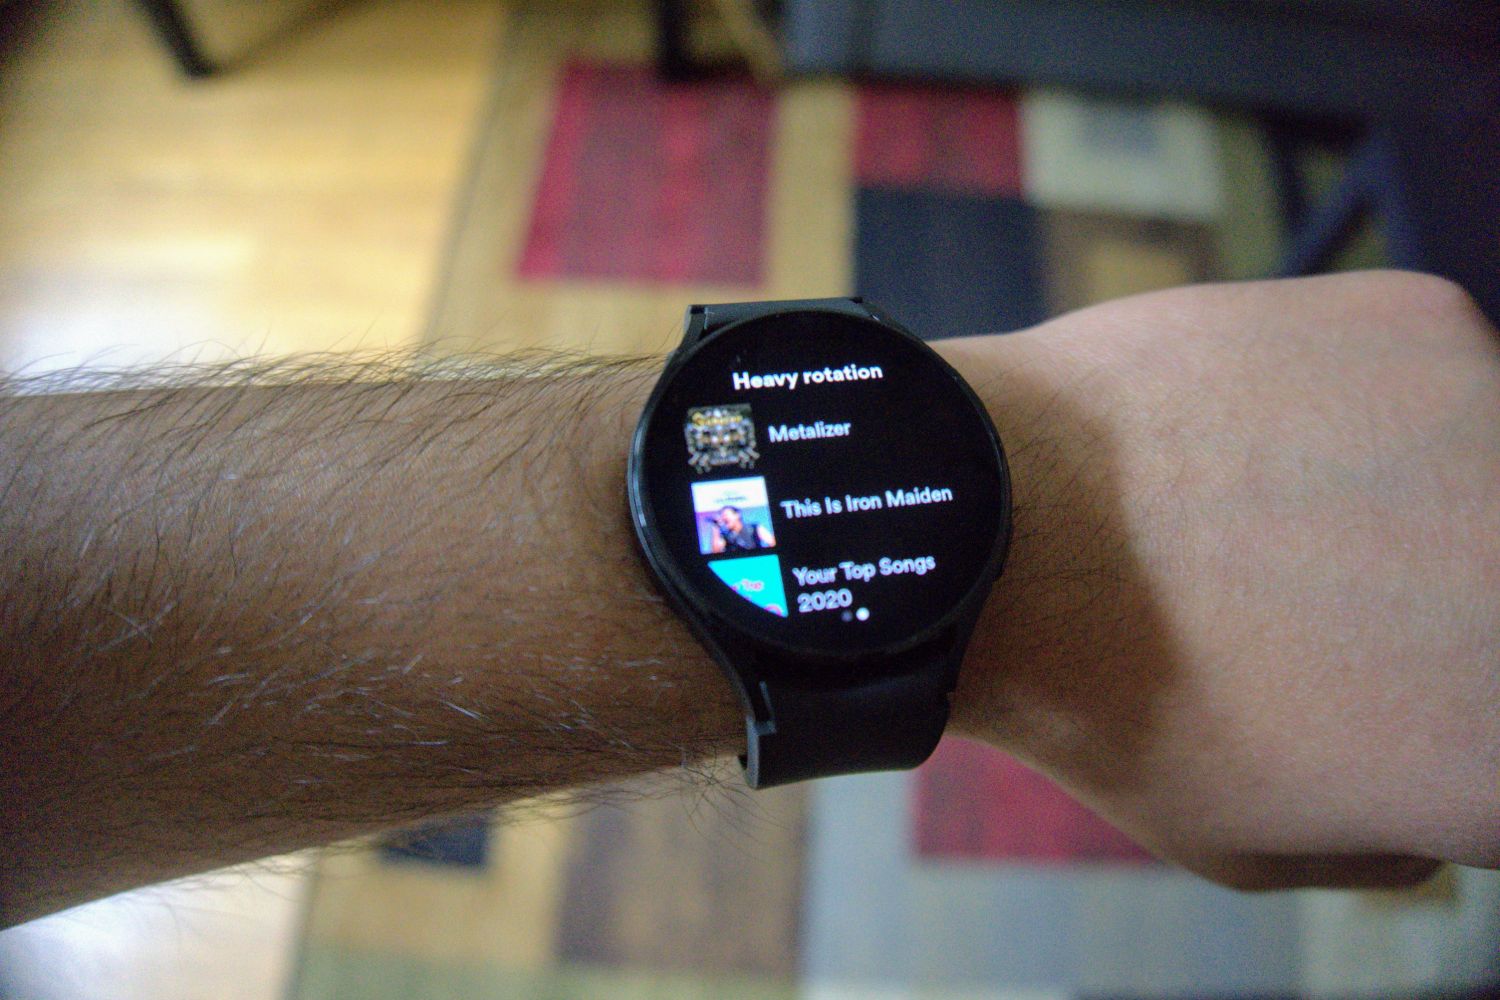 Wear OS by Google Smartwatch - Apps on Google Play